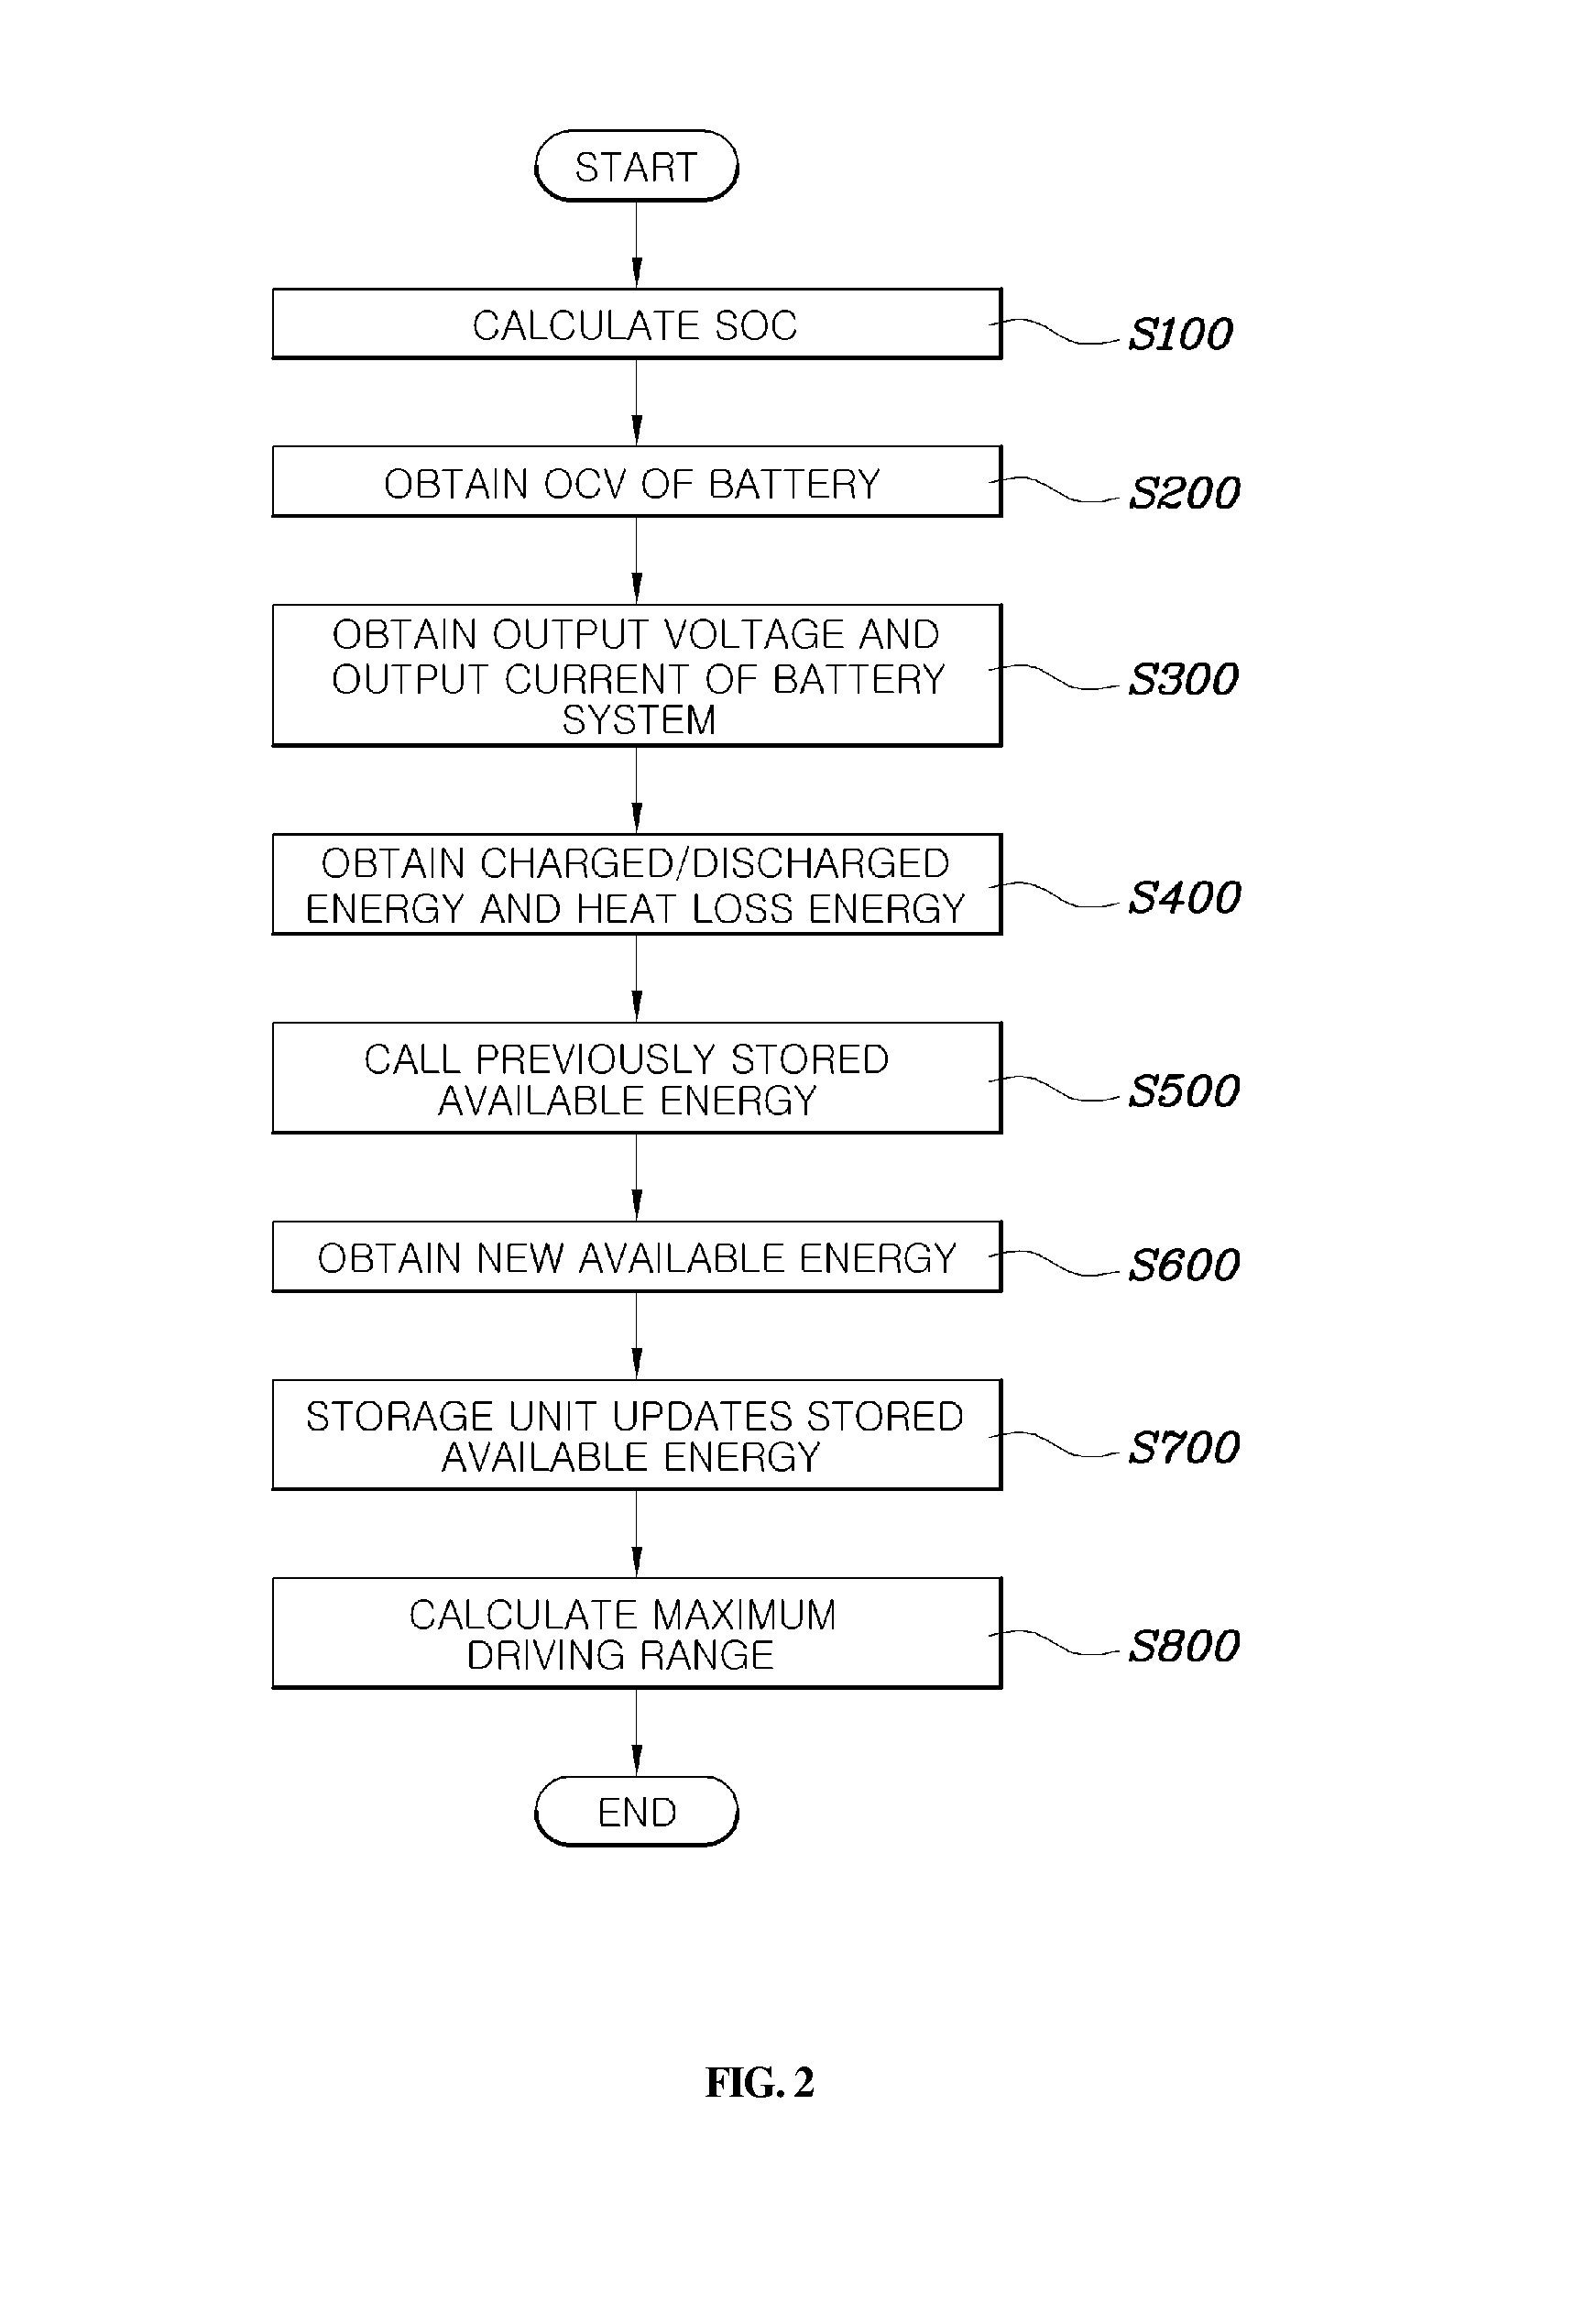 System and method for calculating total available energy from vehicle battery